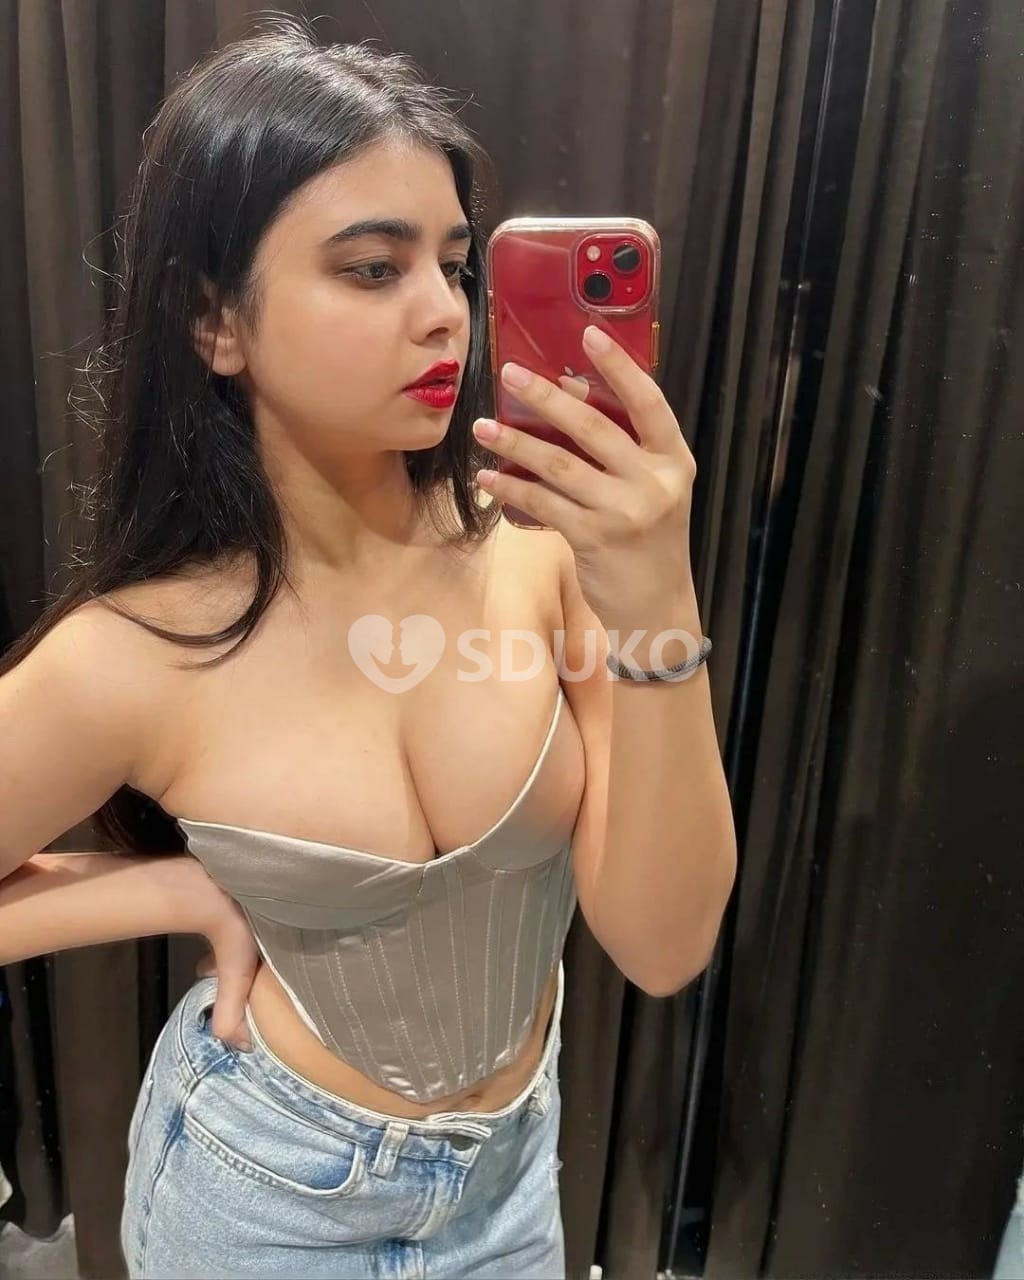 SHAHDARA 🆑 BEST CALL GIRL. INDEPENDENT ESCORT SERVICE IN LOW BUDGET